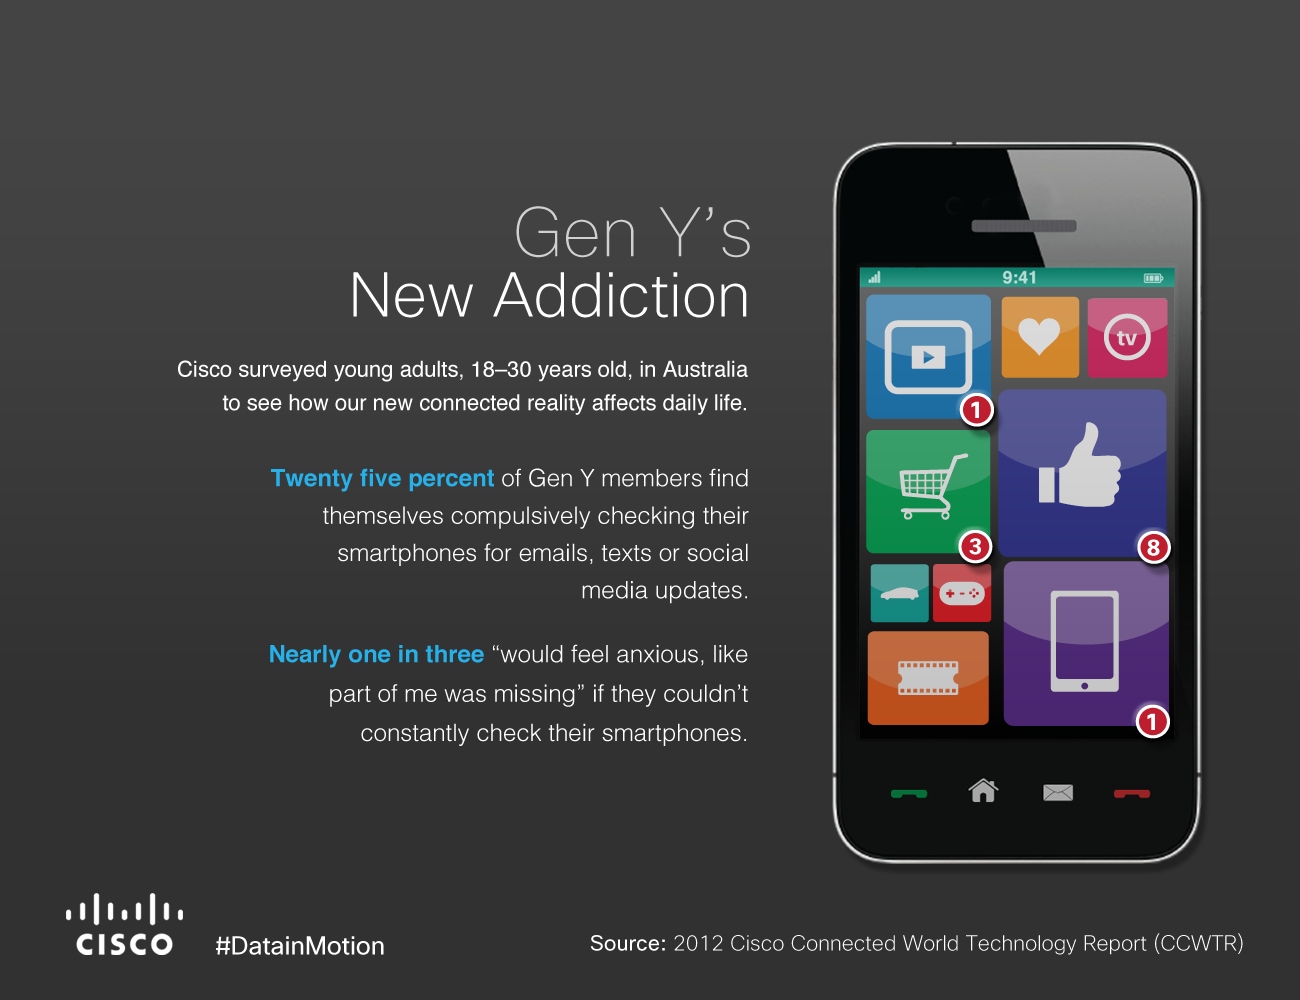 12.   Gen Y’s New Addition (Infographic